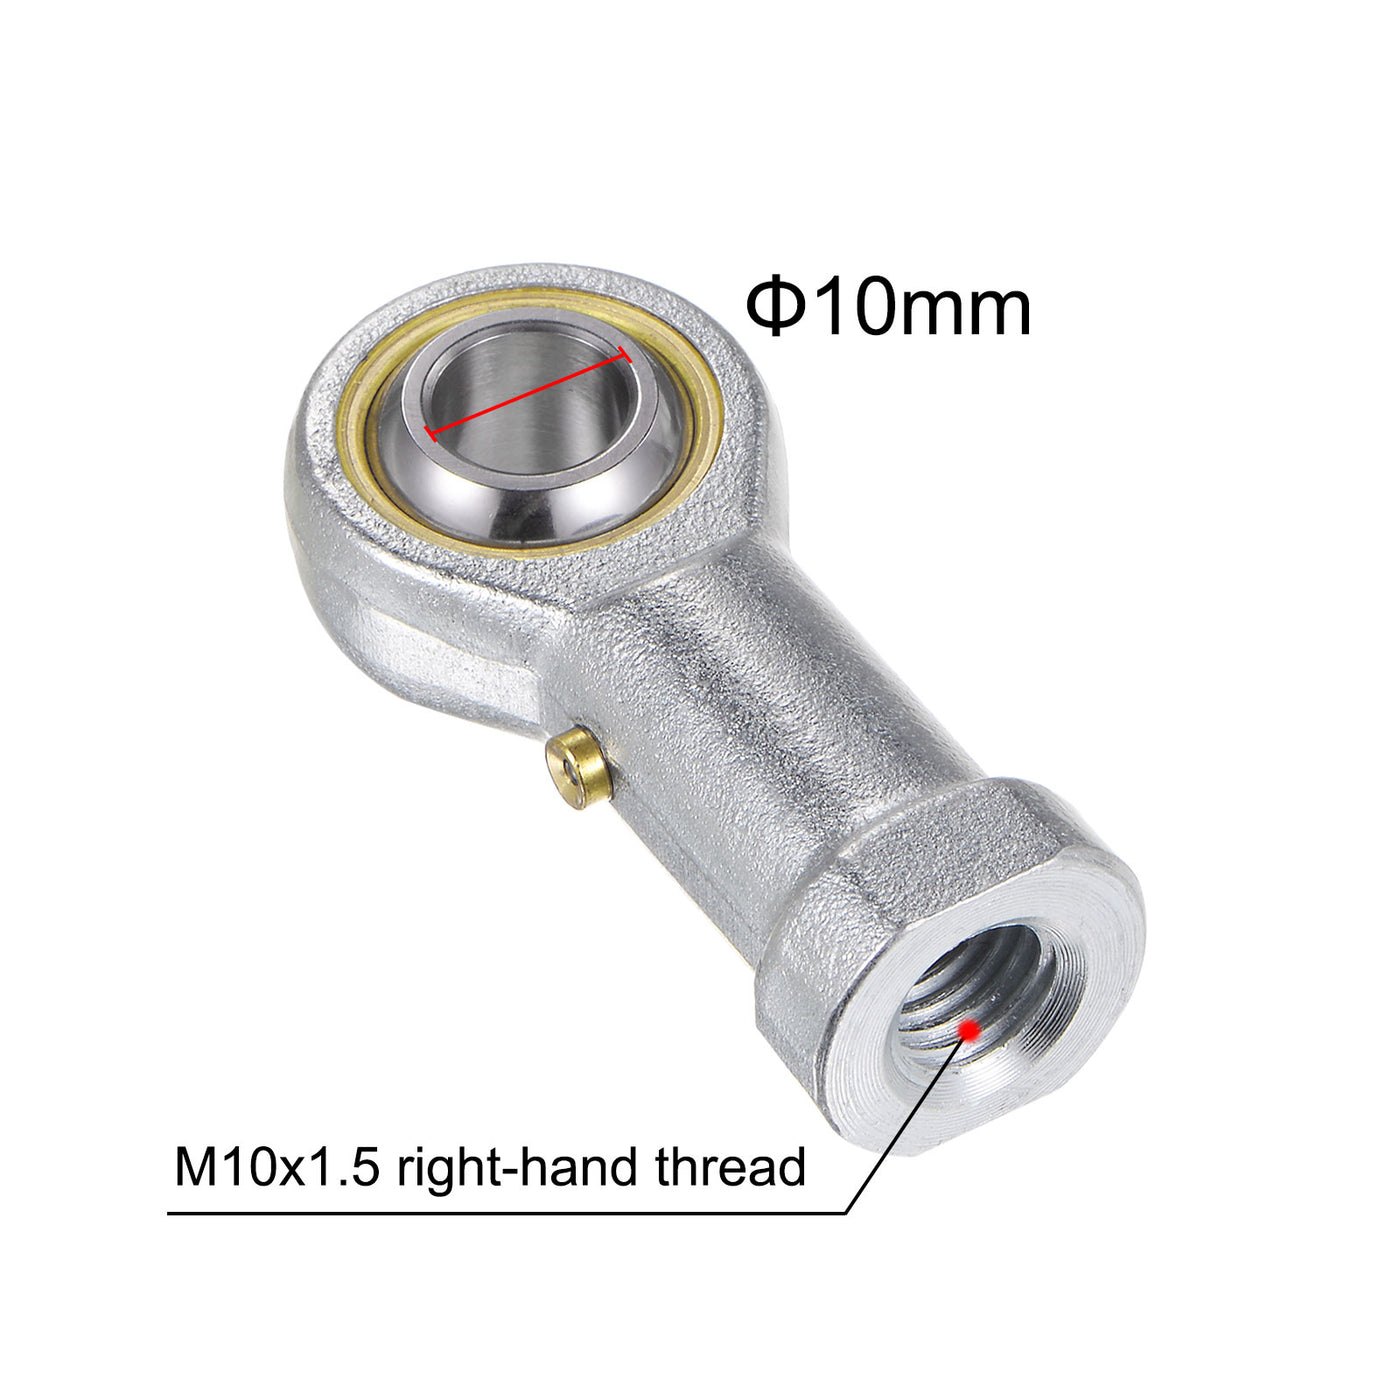 uxcell Uxcell 2pcs PHS10 M10 Female Rod End Bearing M10x1.5 Right Hand Thread,Includes Jam Nut